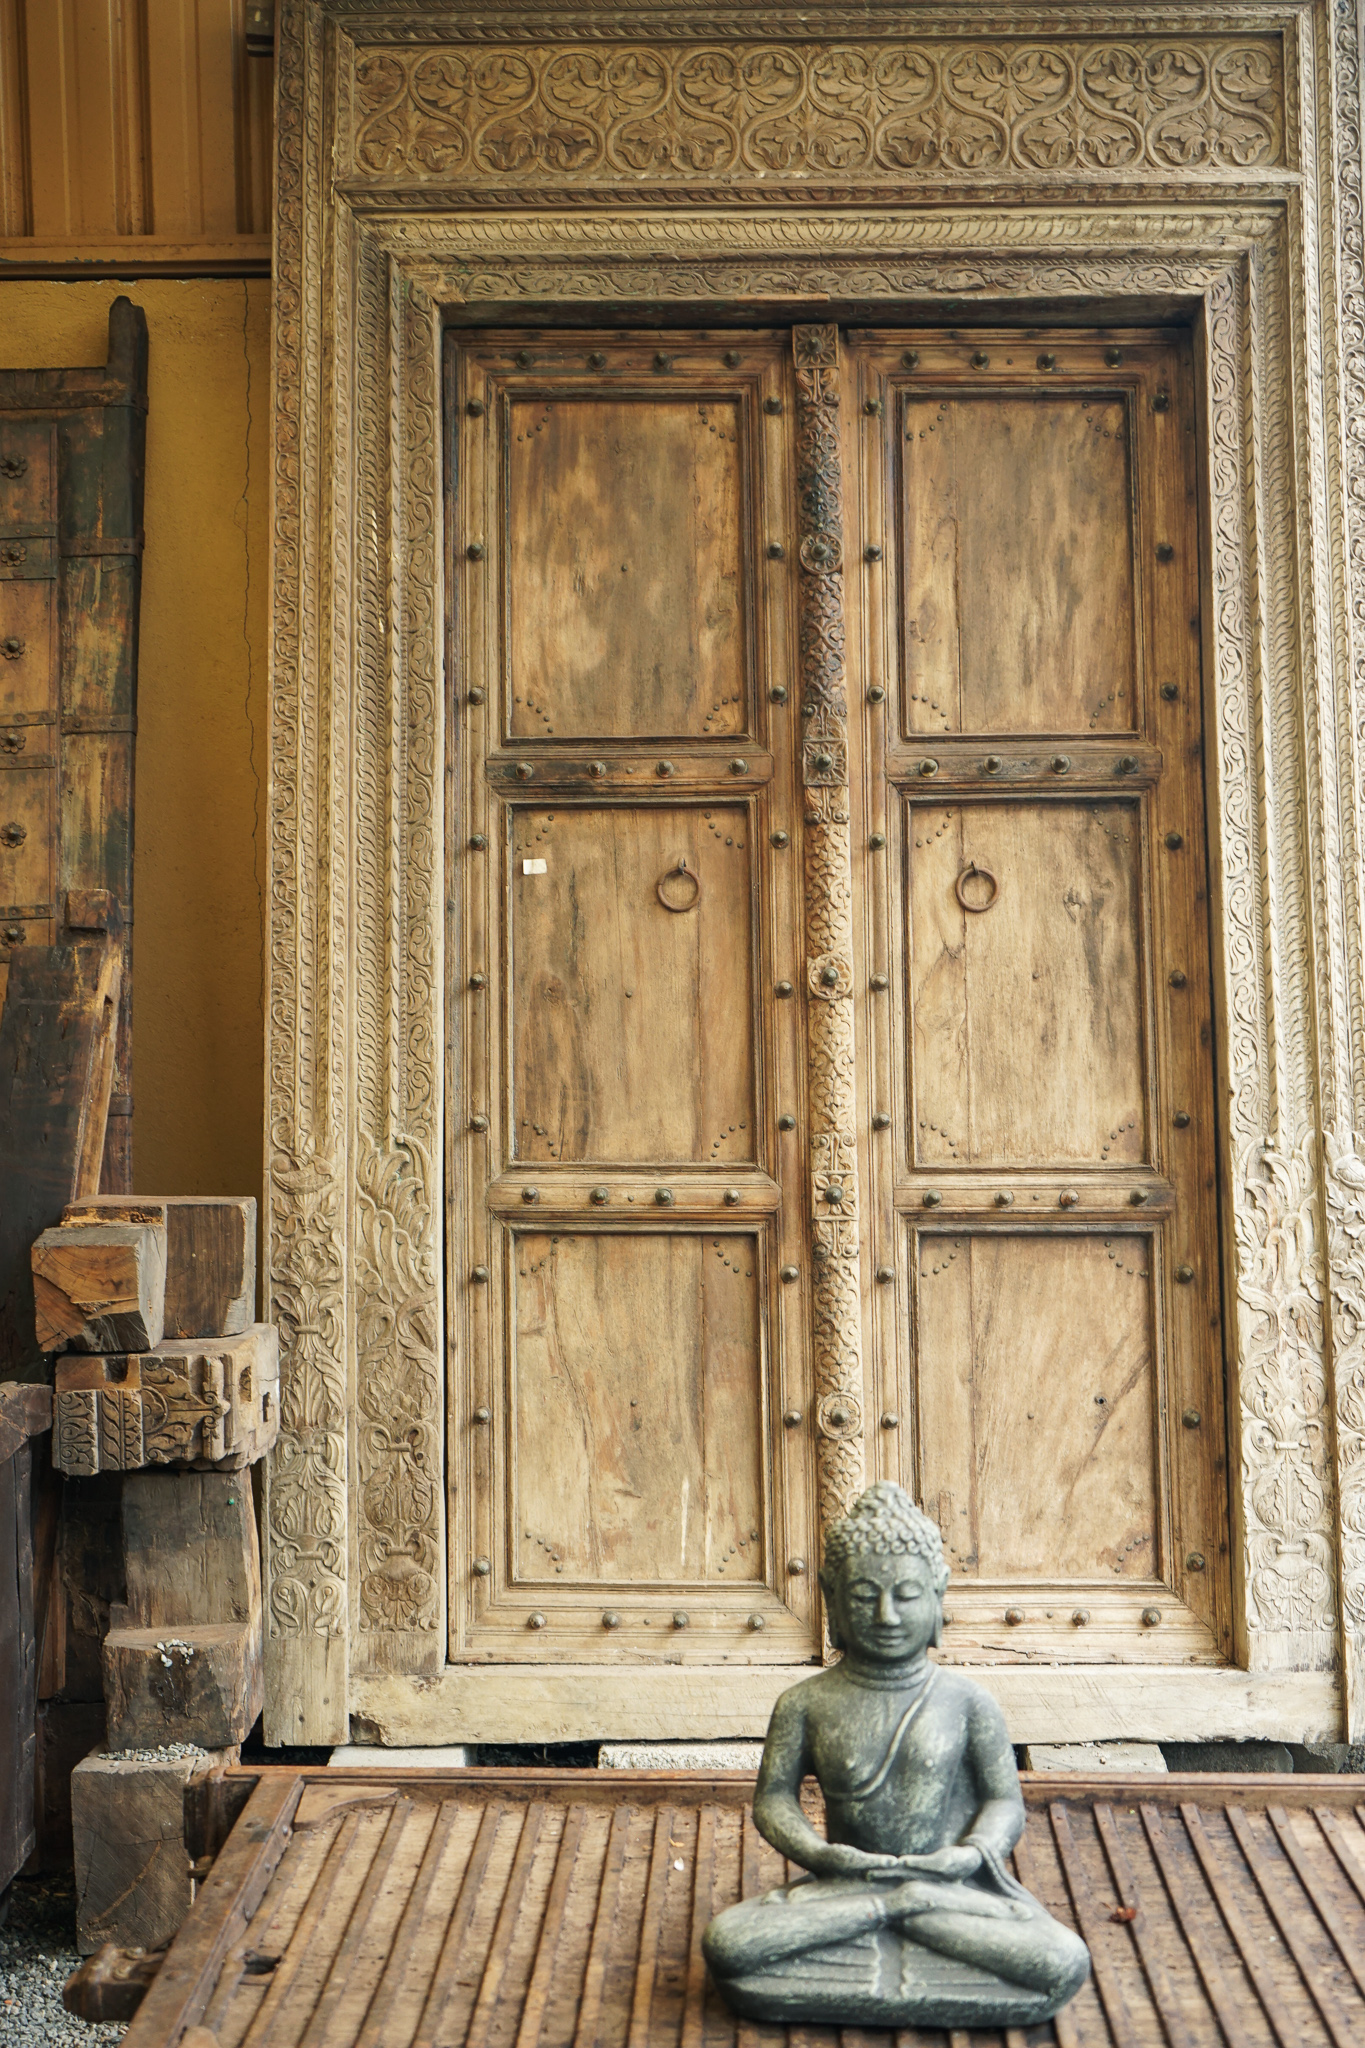 Indian carved doors